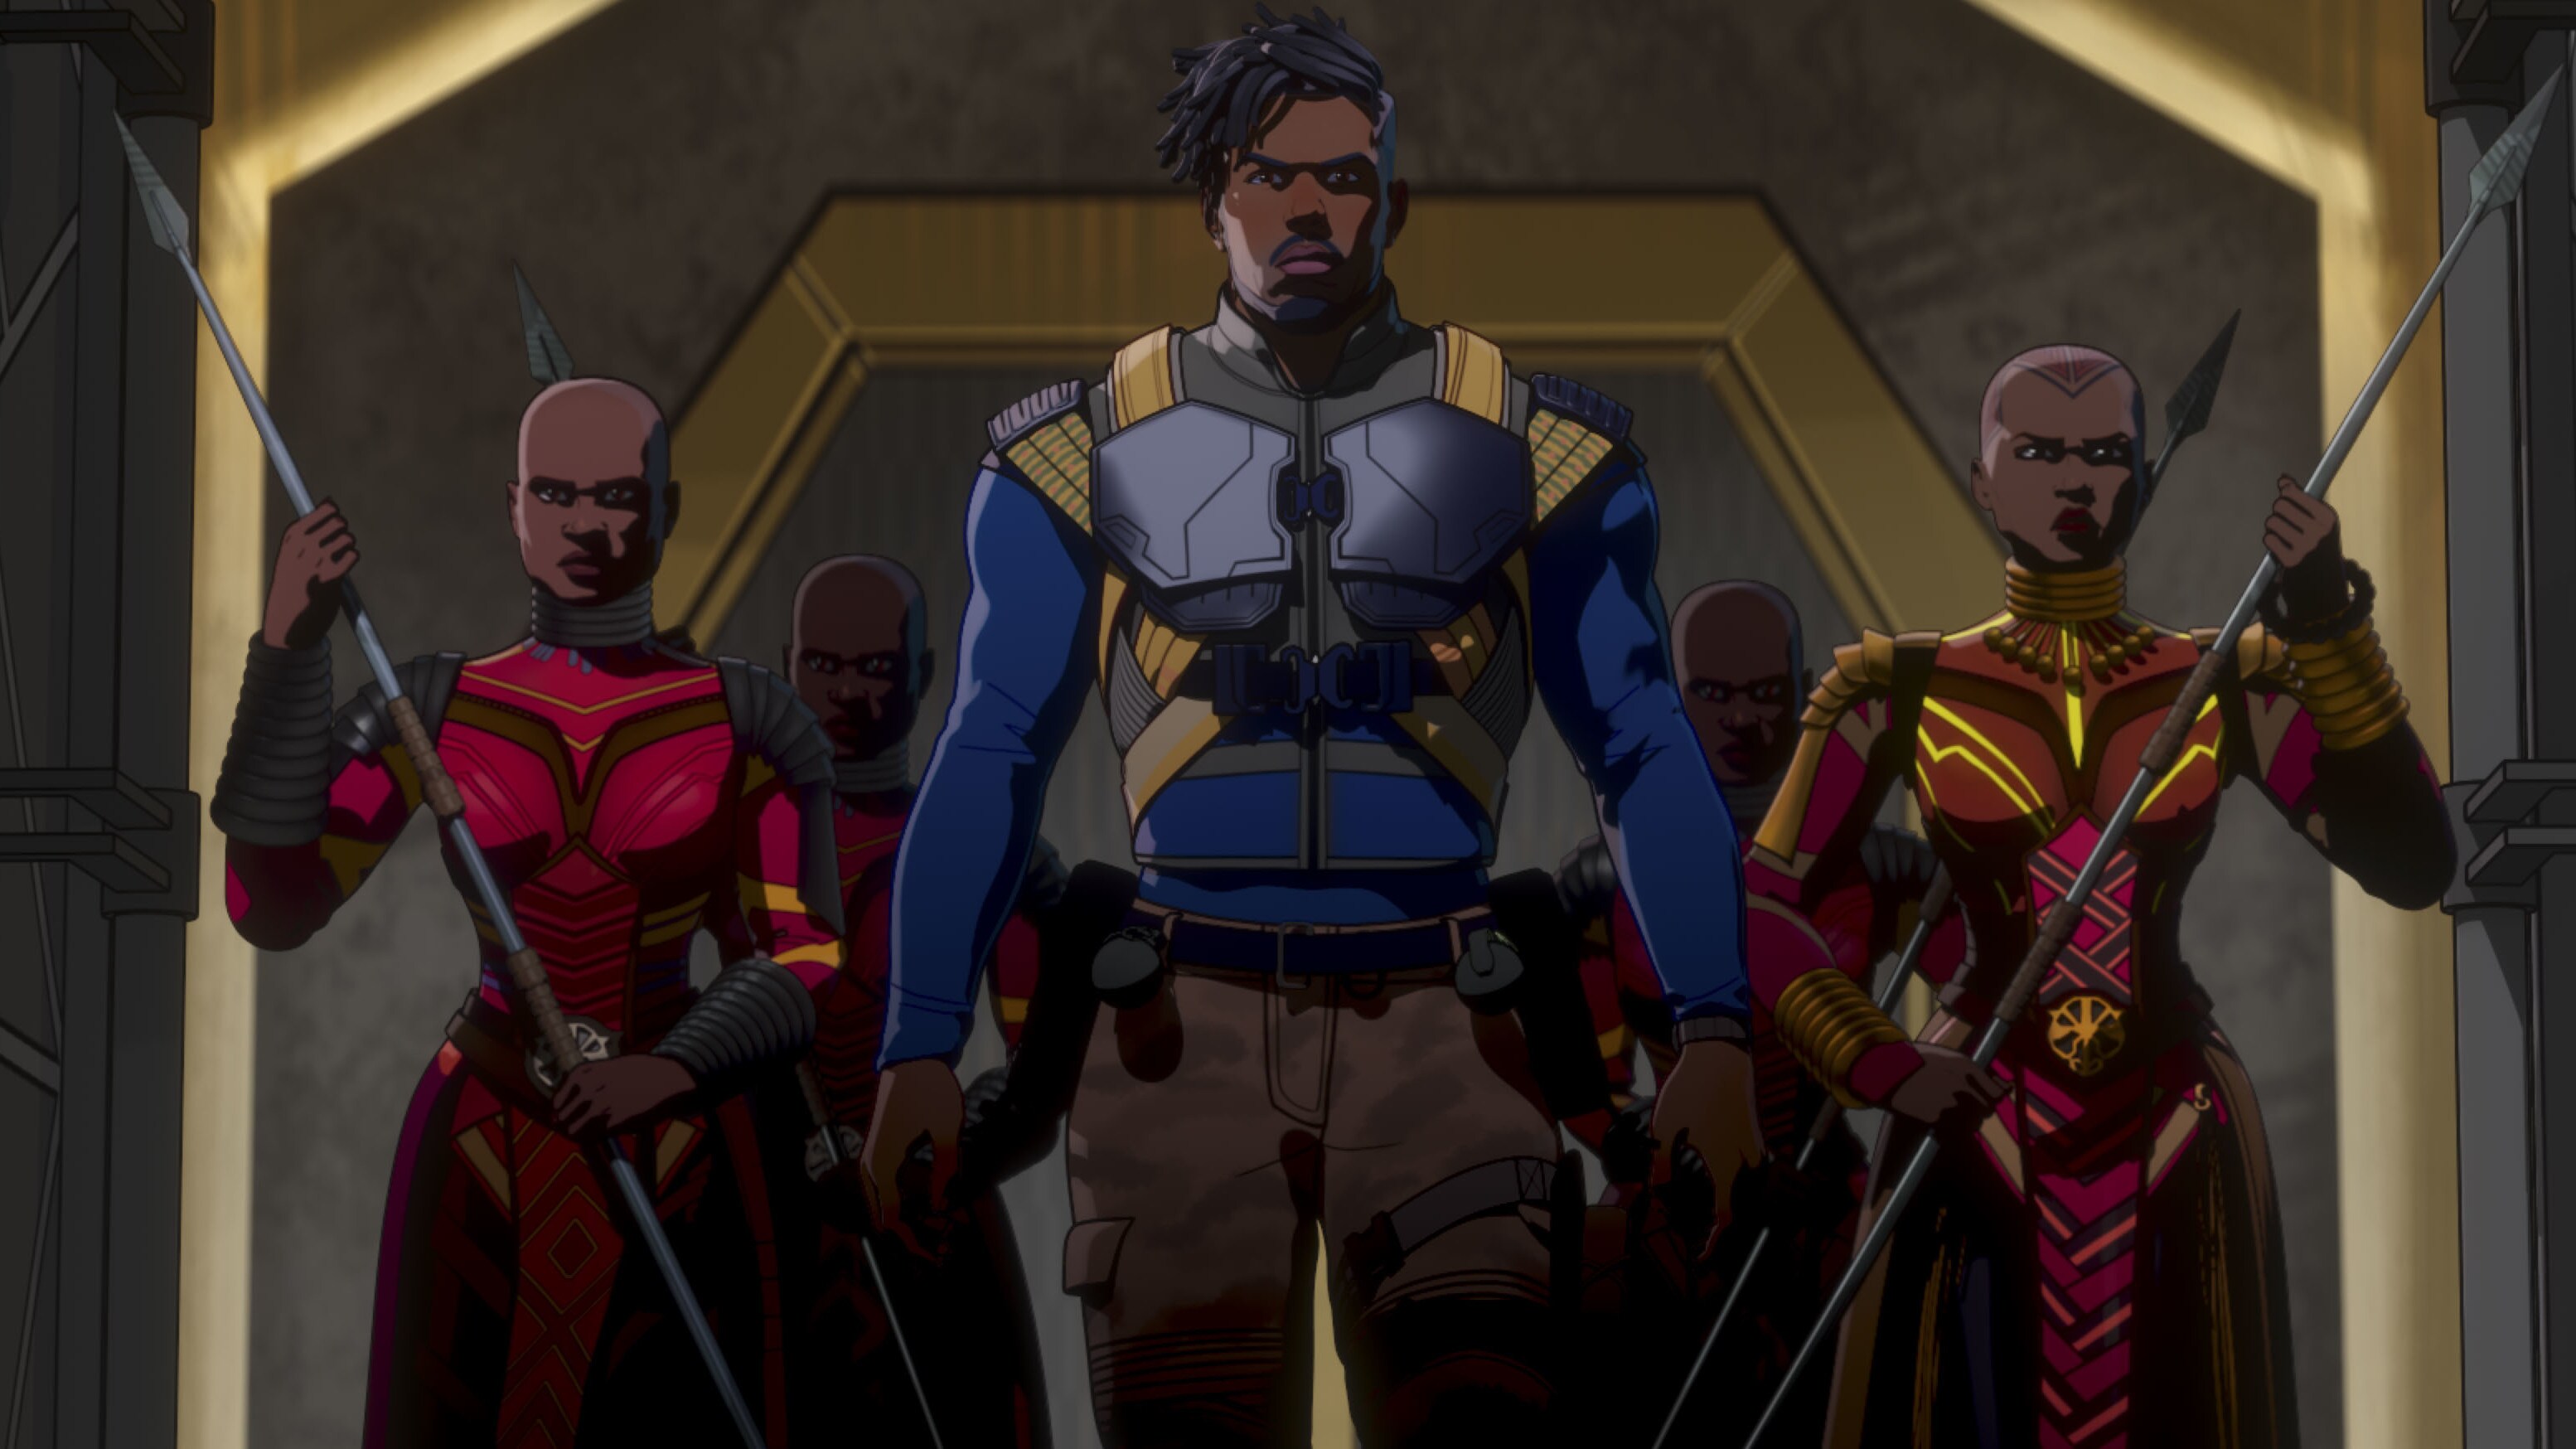 Killmonger and the Dora Milaje in Marvel Studios' WHAT IF…? exclusively on Disney+. ©Marvel Studios 2021. All Rights Reserved.